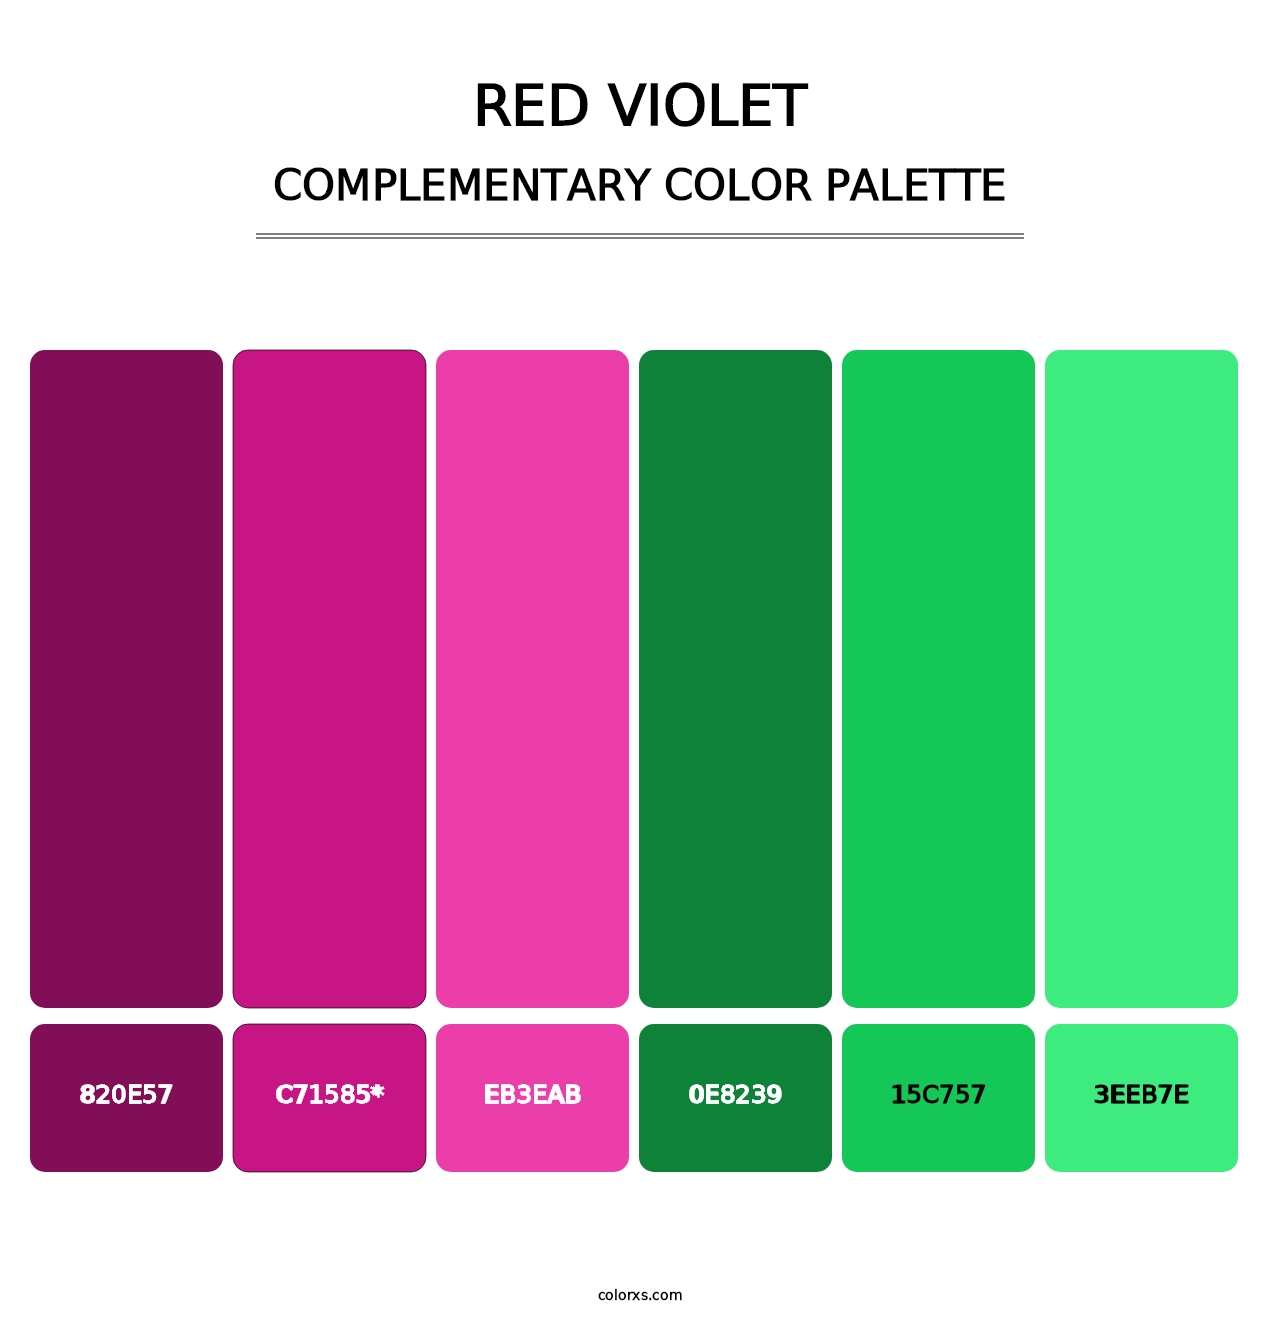 Red Violet - Complementary Color Palette